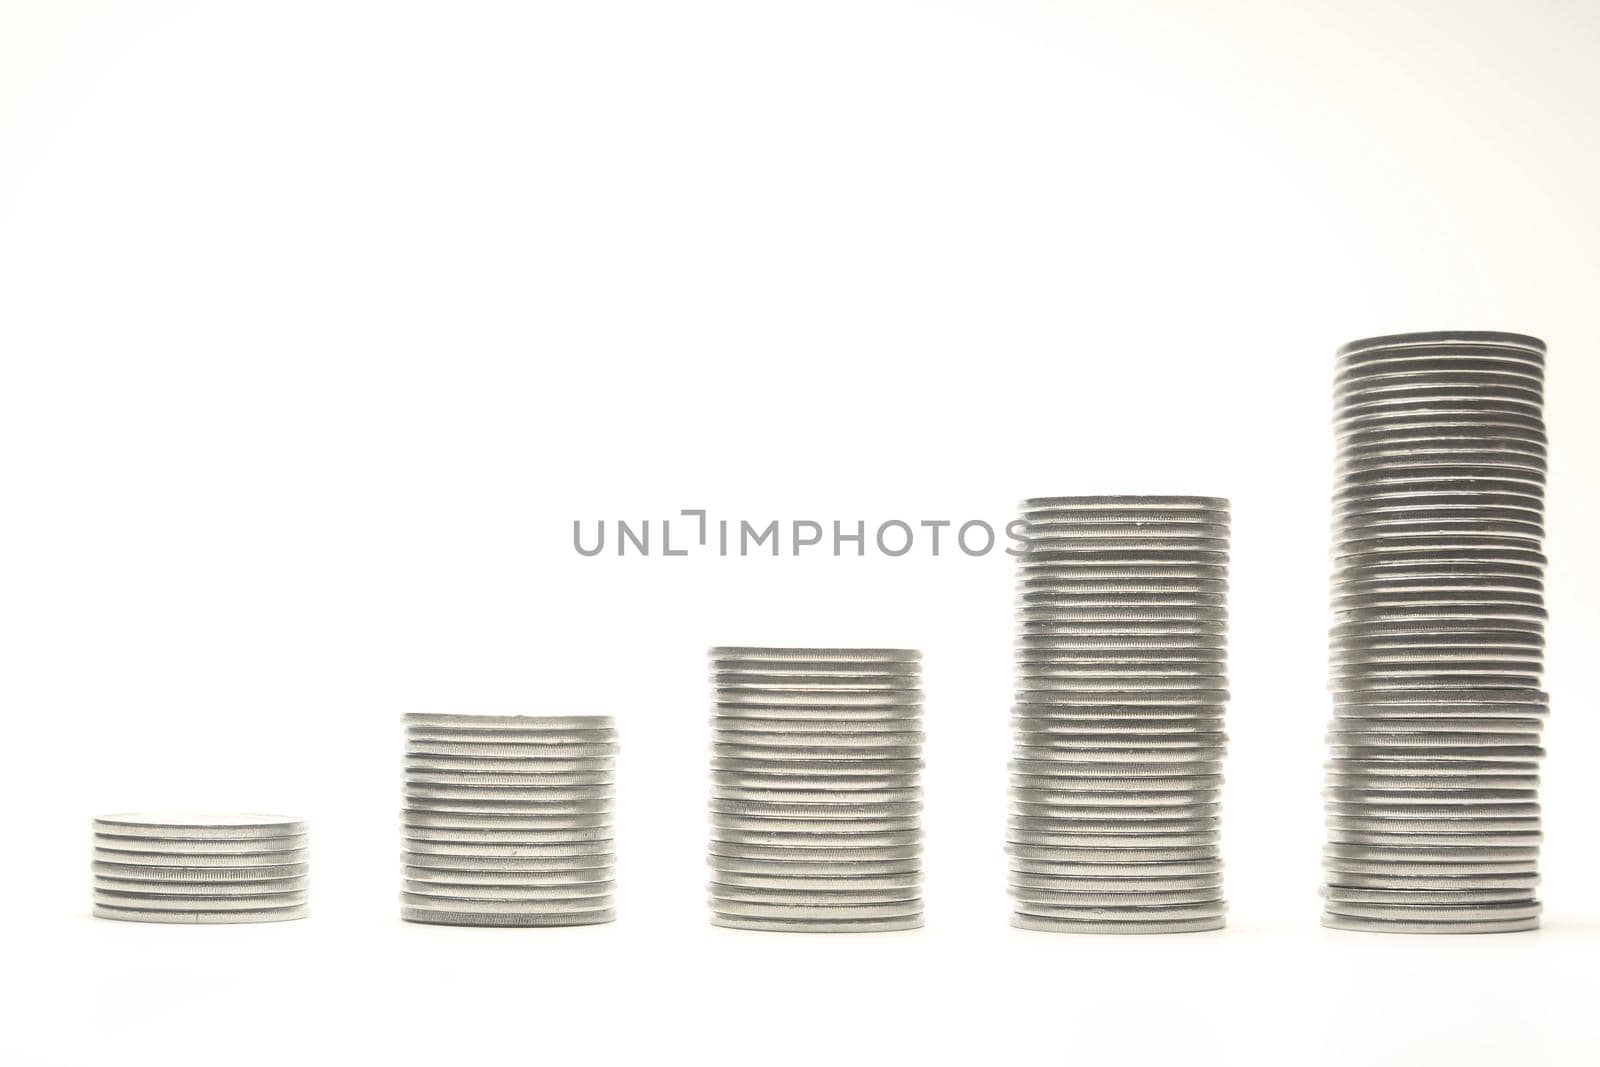 Stacks of silver coins in the form of the diagram, isolated over white background. Shallow DOF.